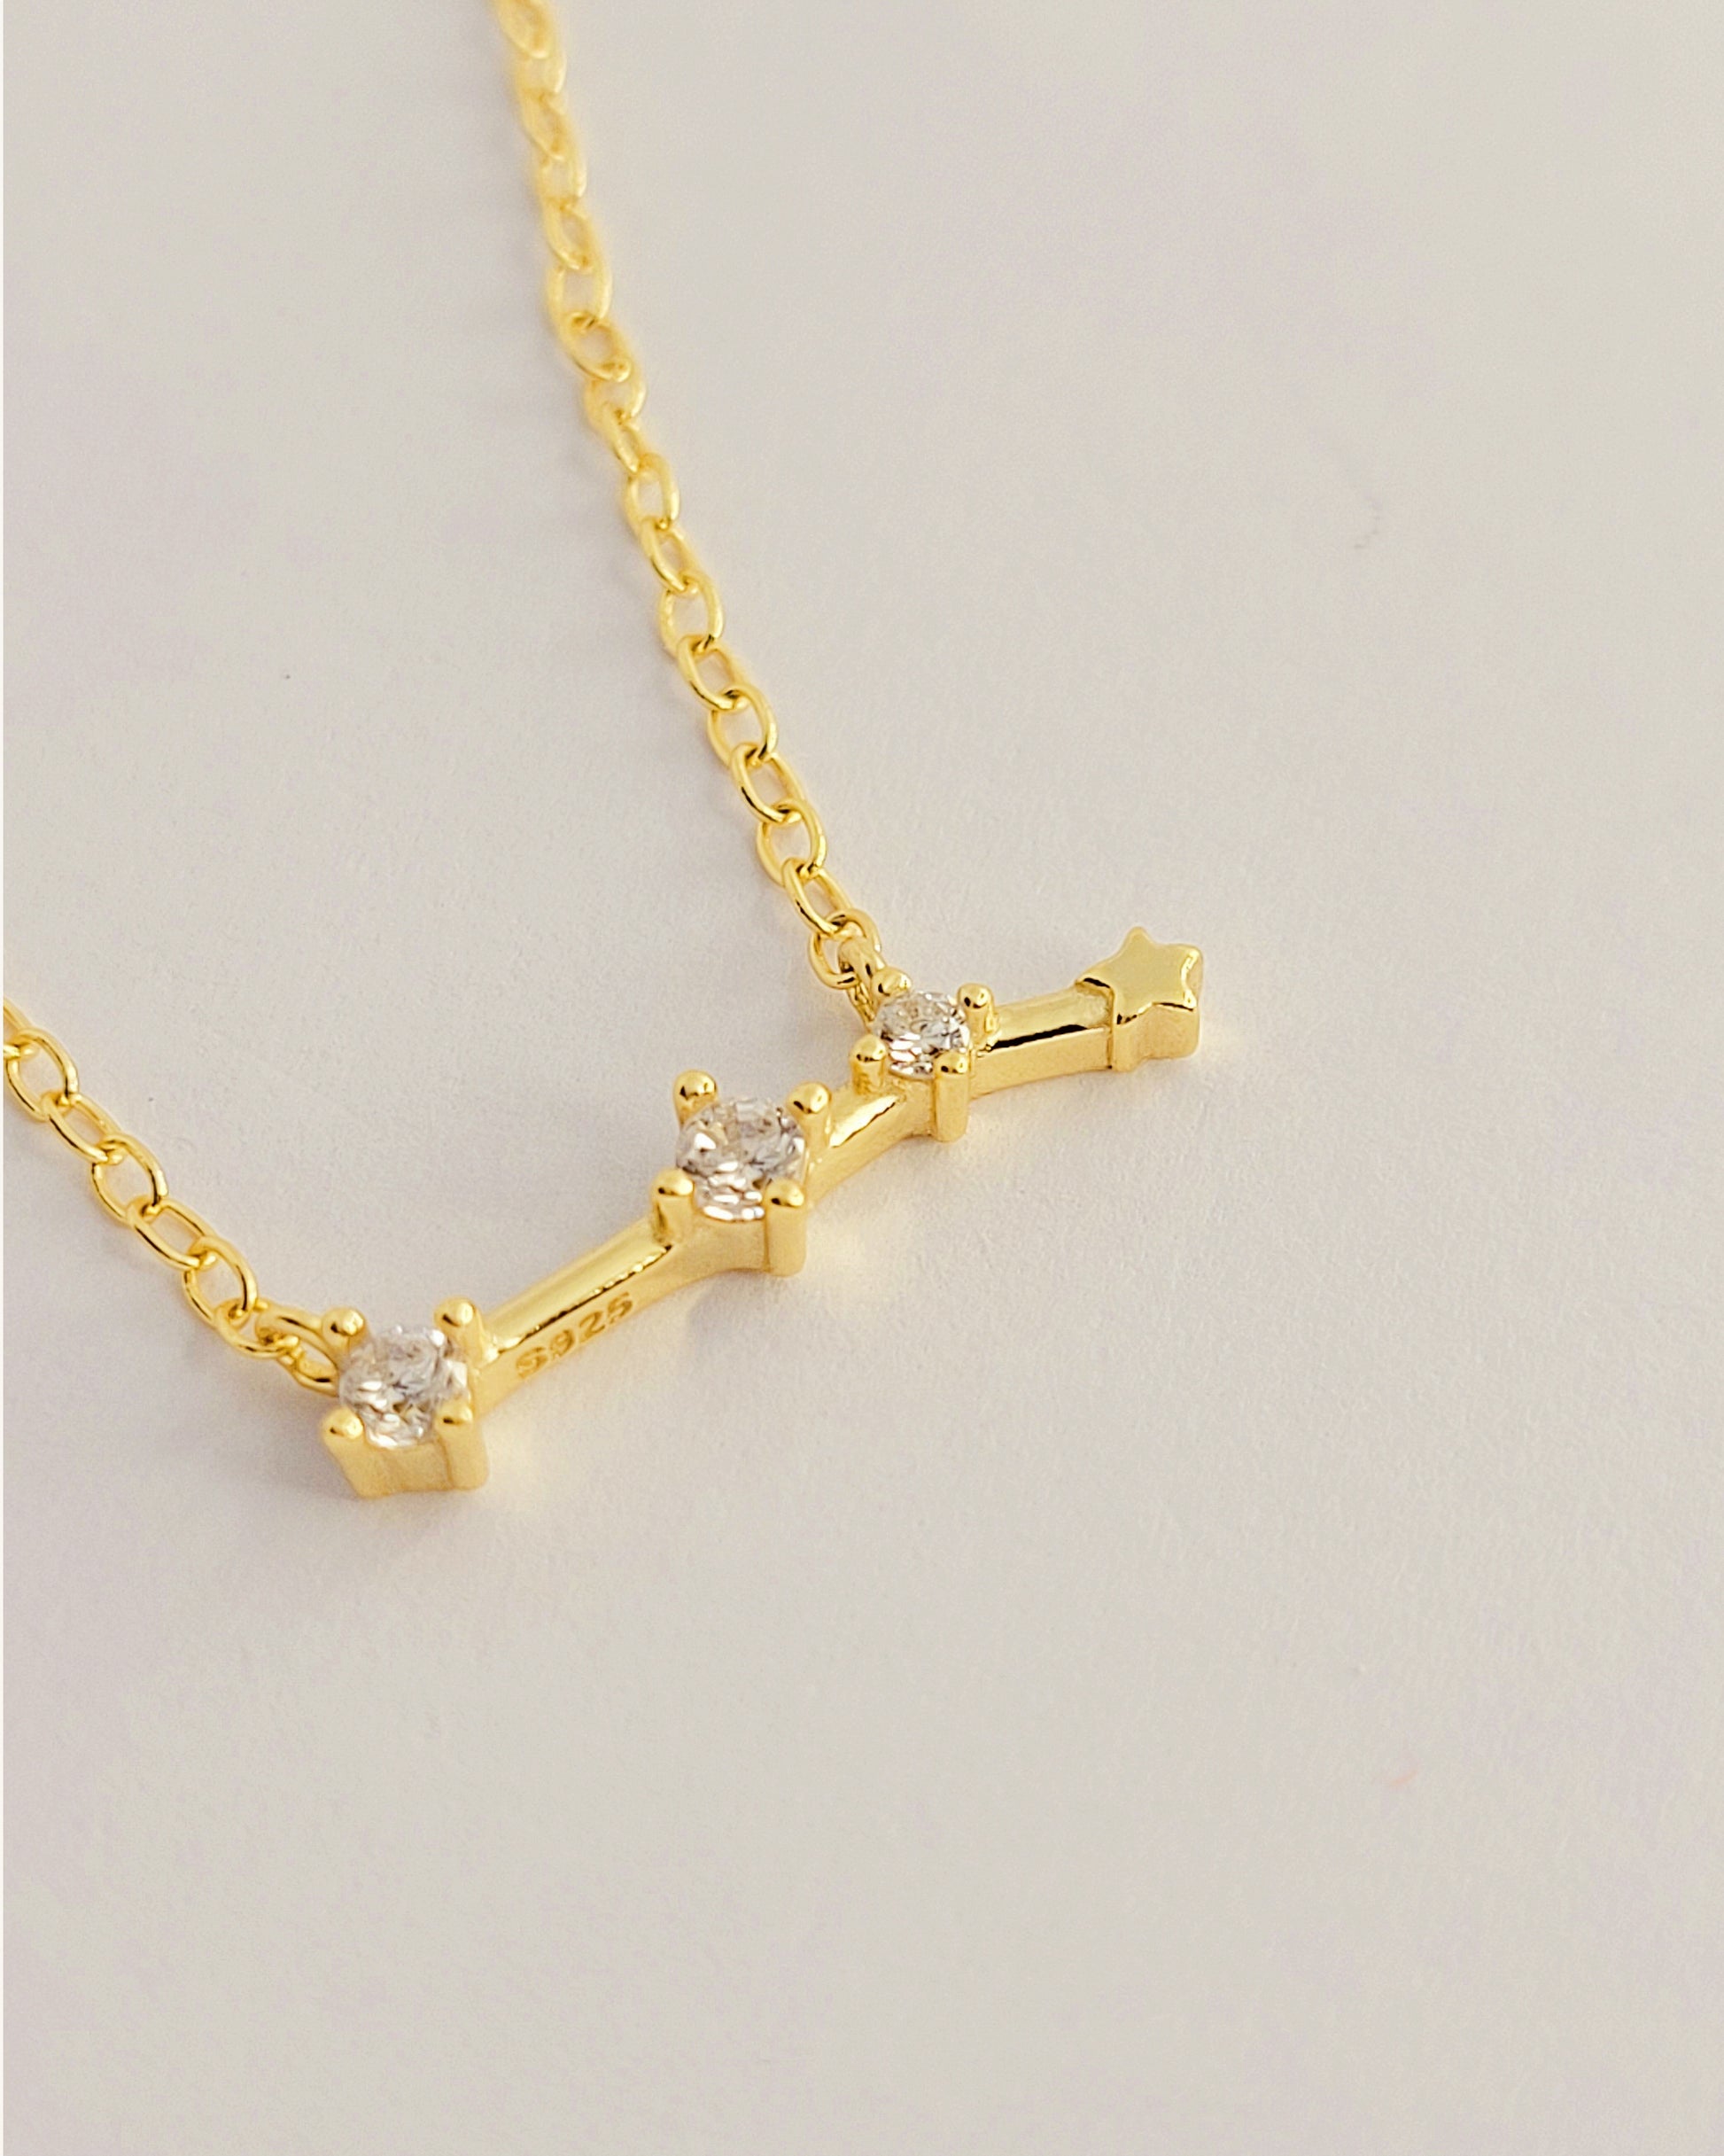 aries zodiac star sign necklace